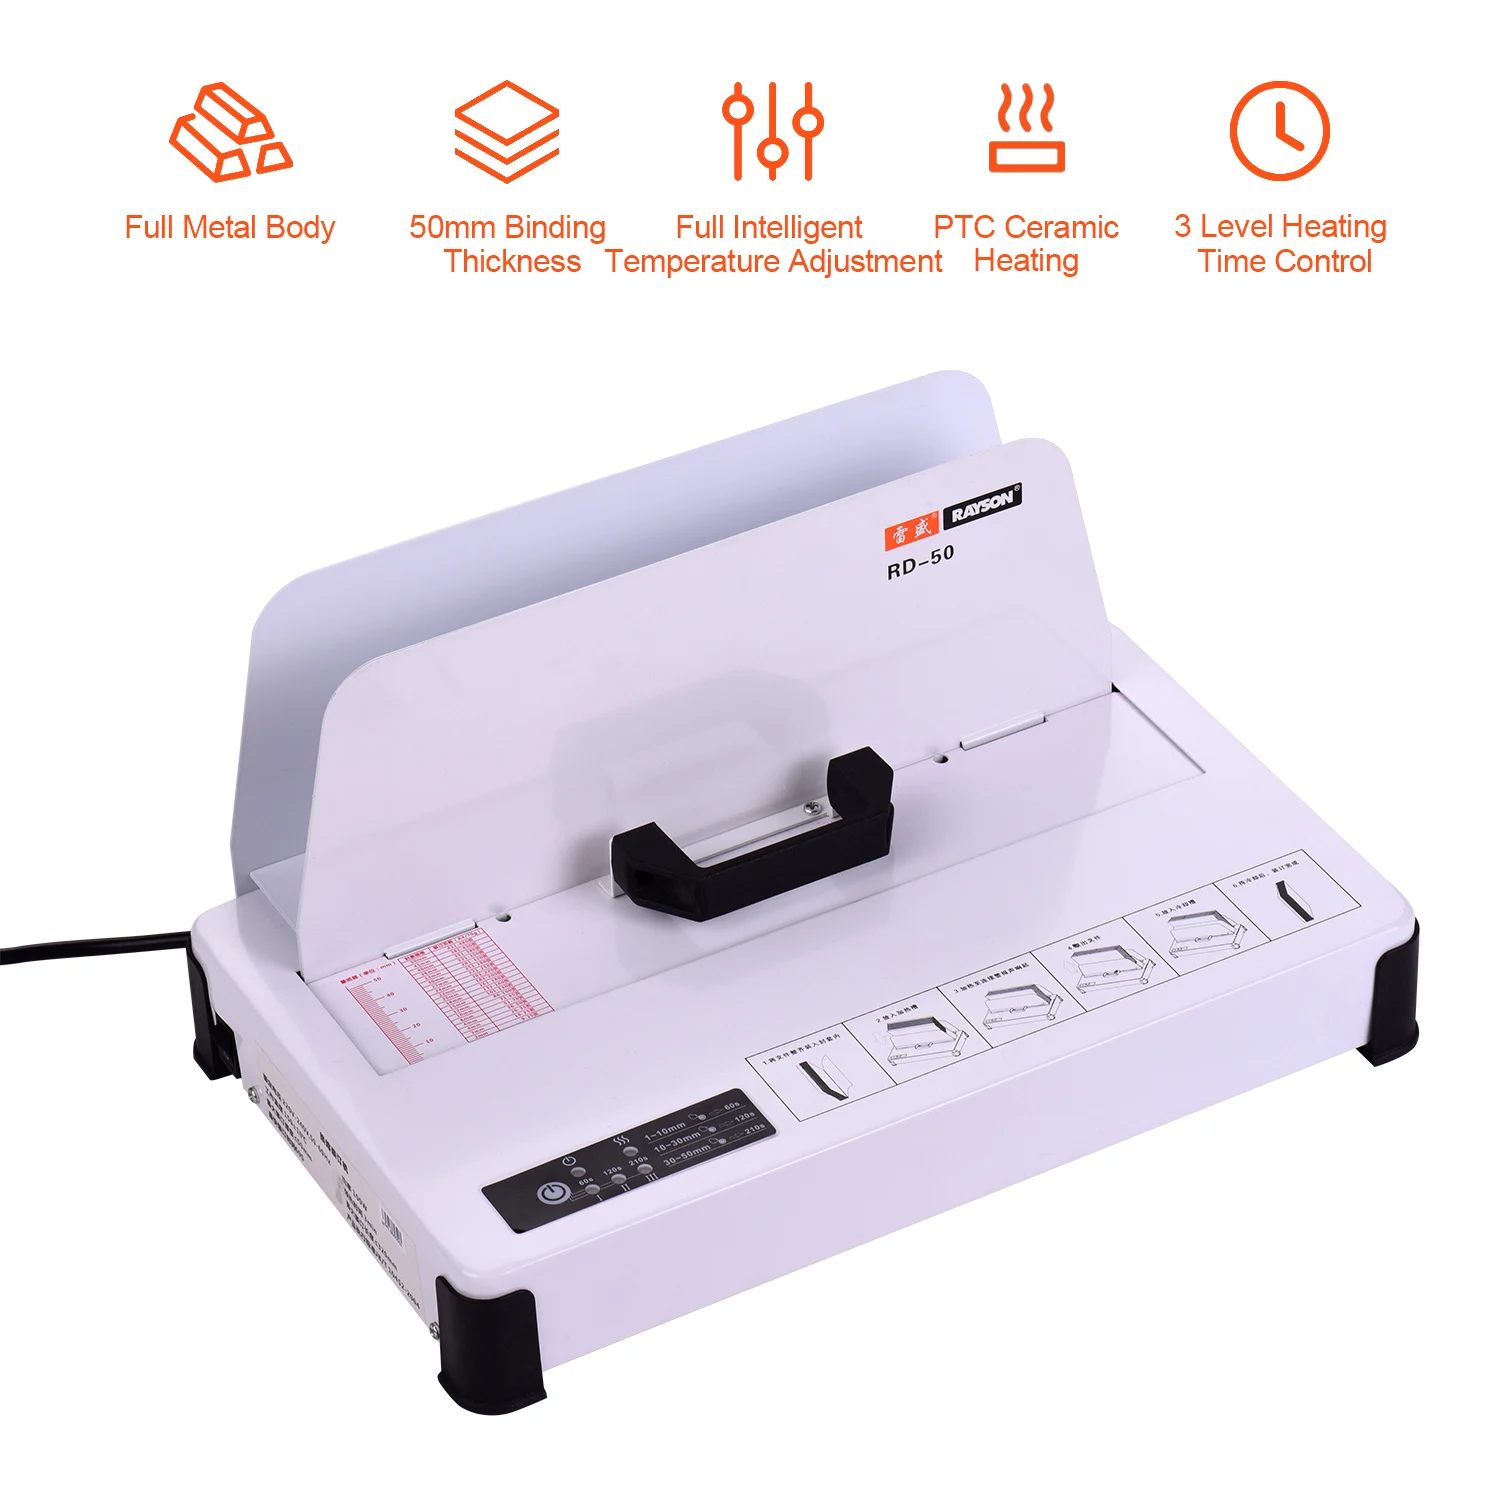 

A4 Books Contract Document Automatic Binder Desktop Hot Melt Binding Machine 300W 50mm Binding Thickness for School Office